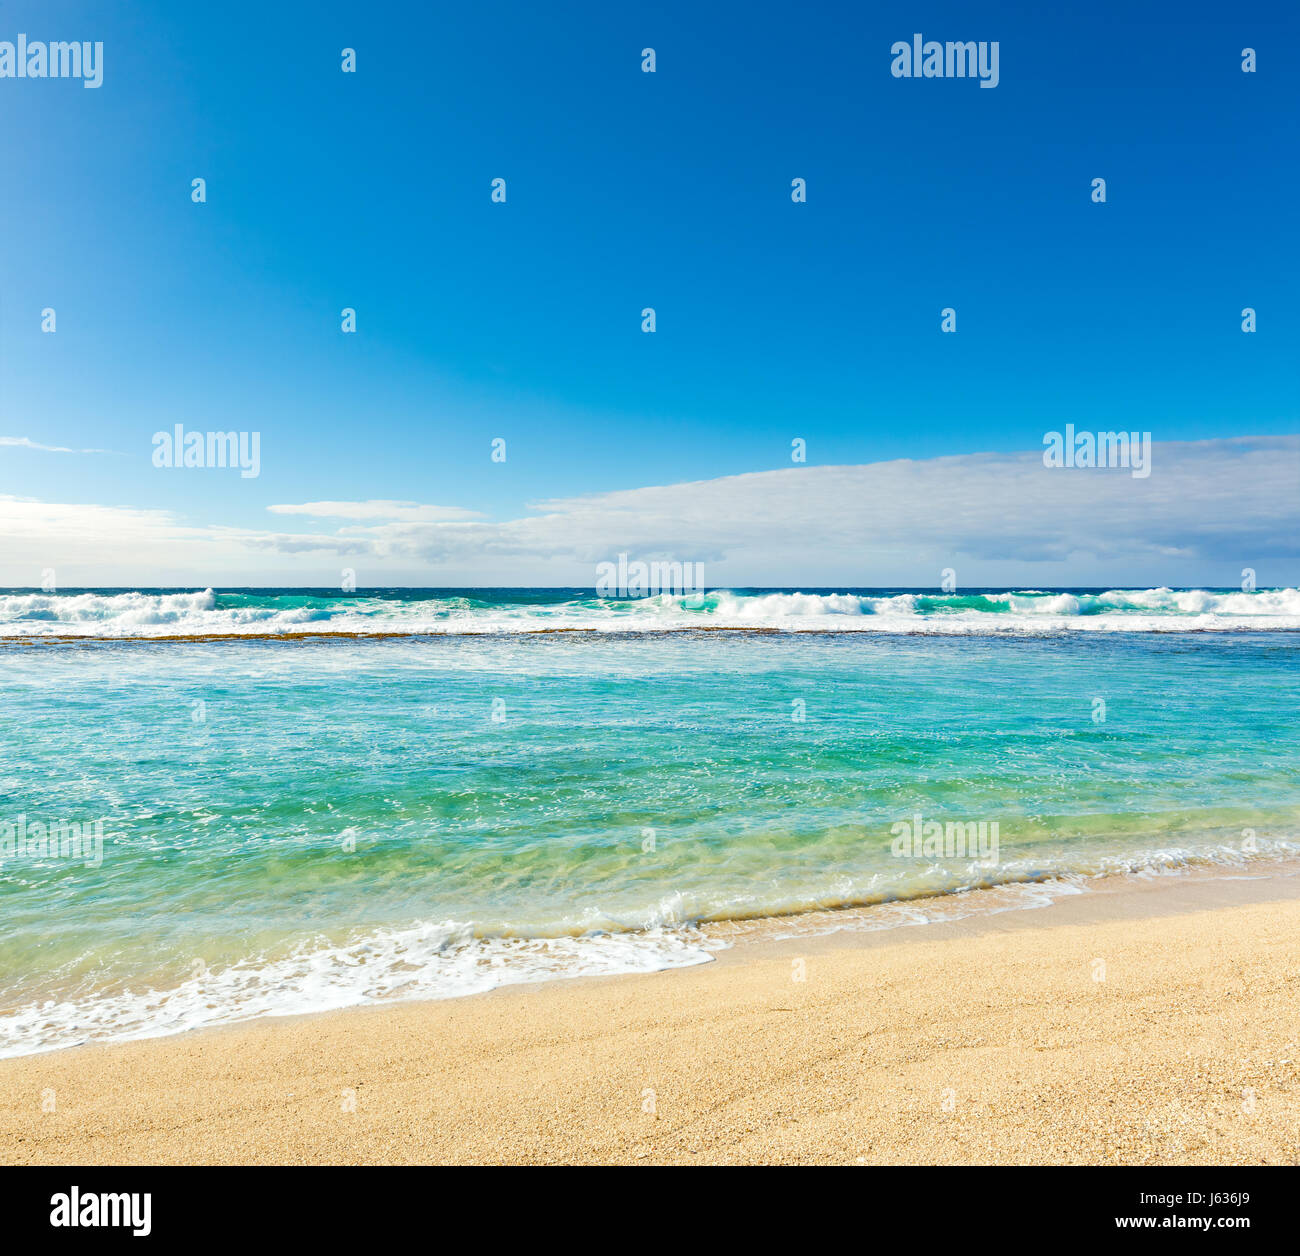 Amazing Gris-Gris beach at day time. Mauritius. Stock Photo